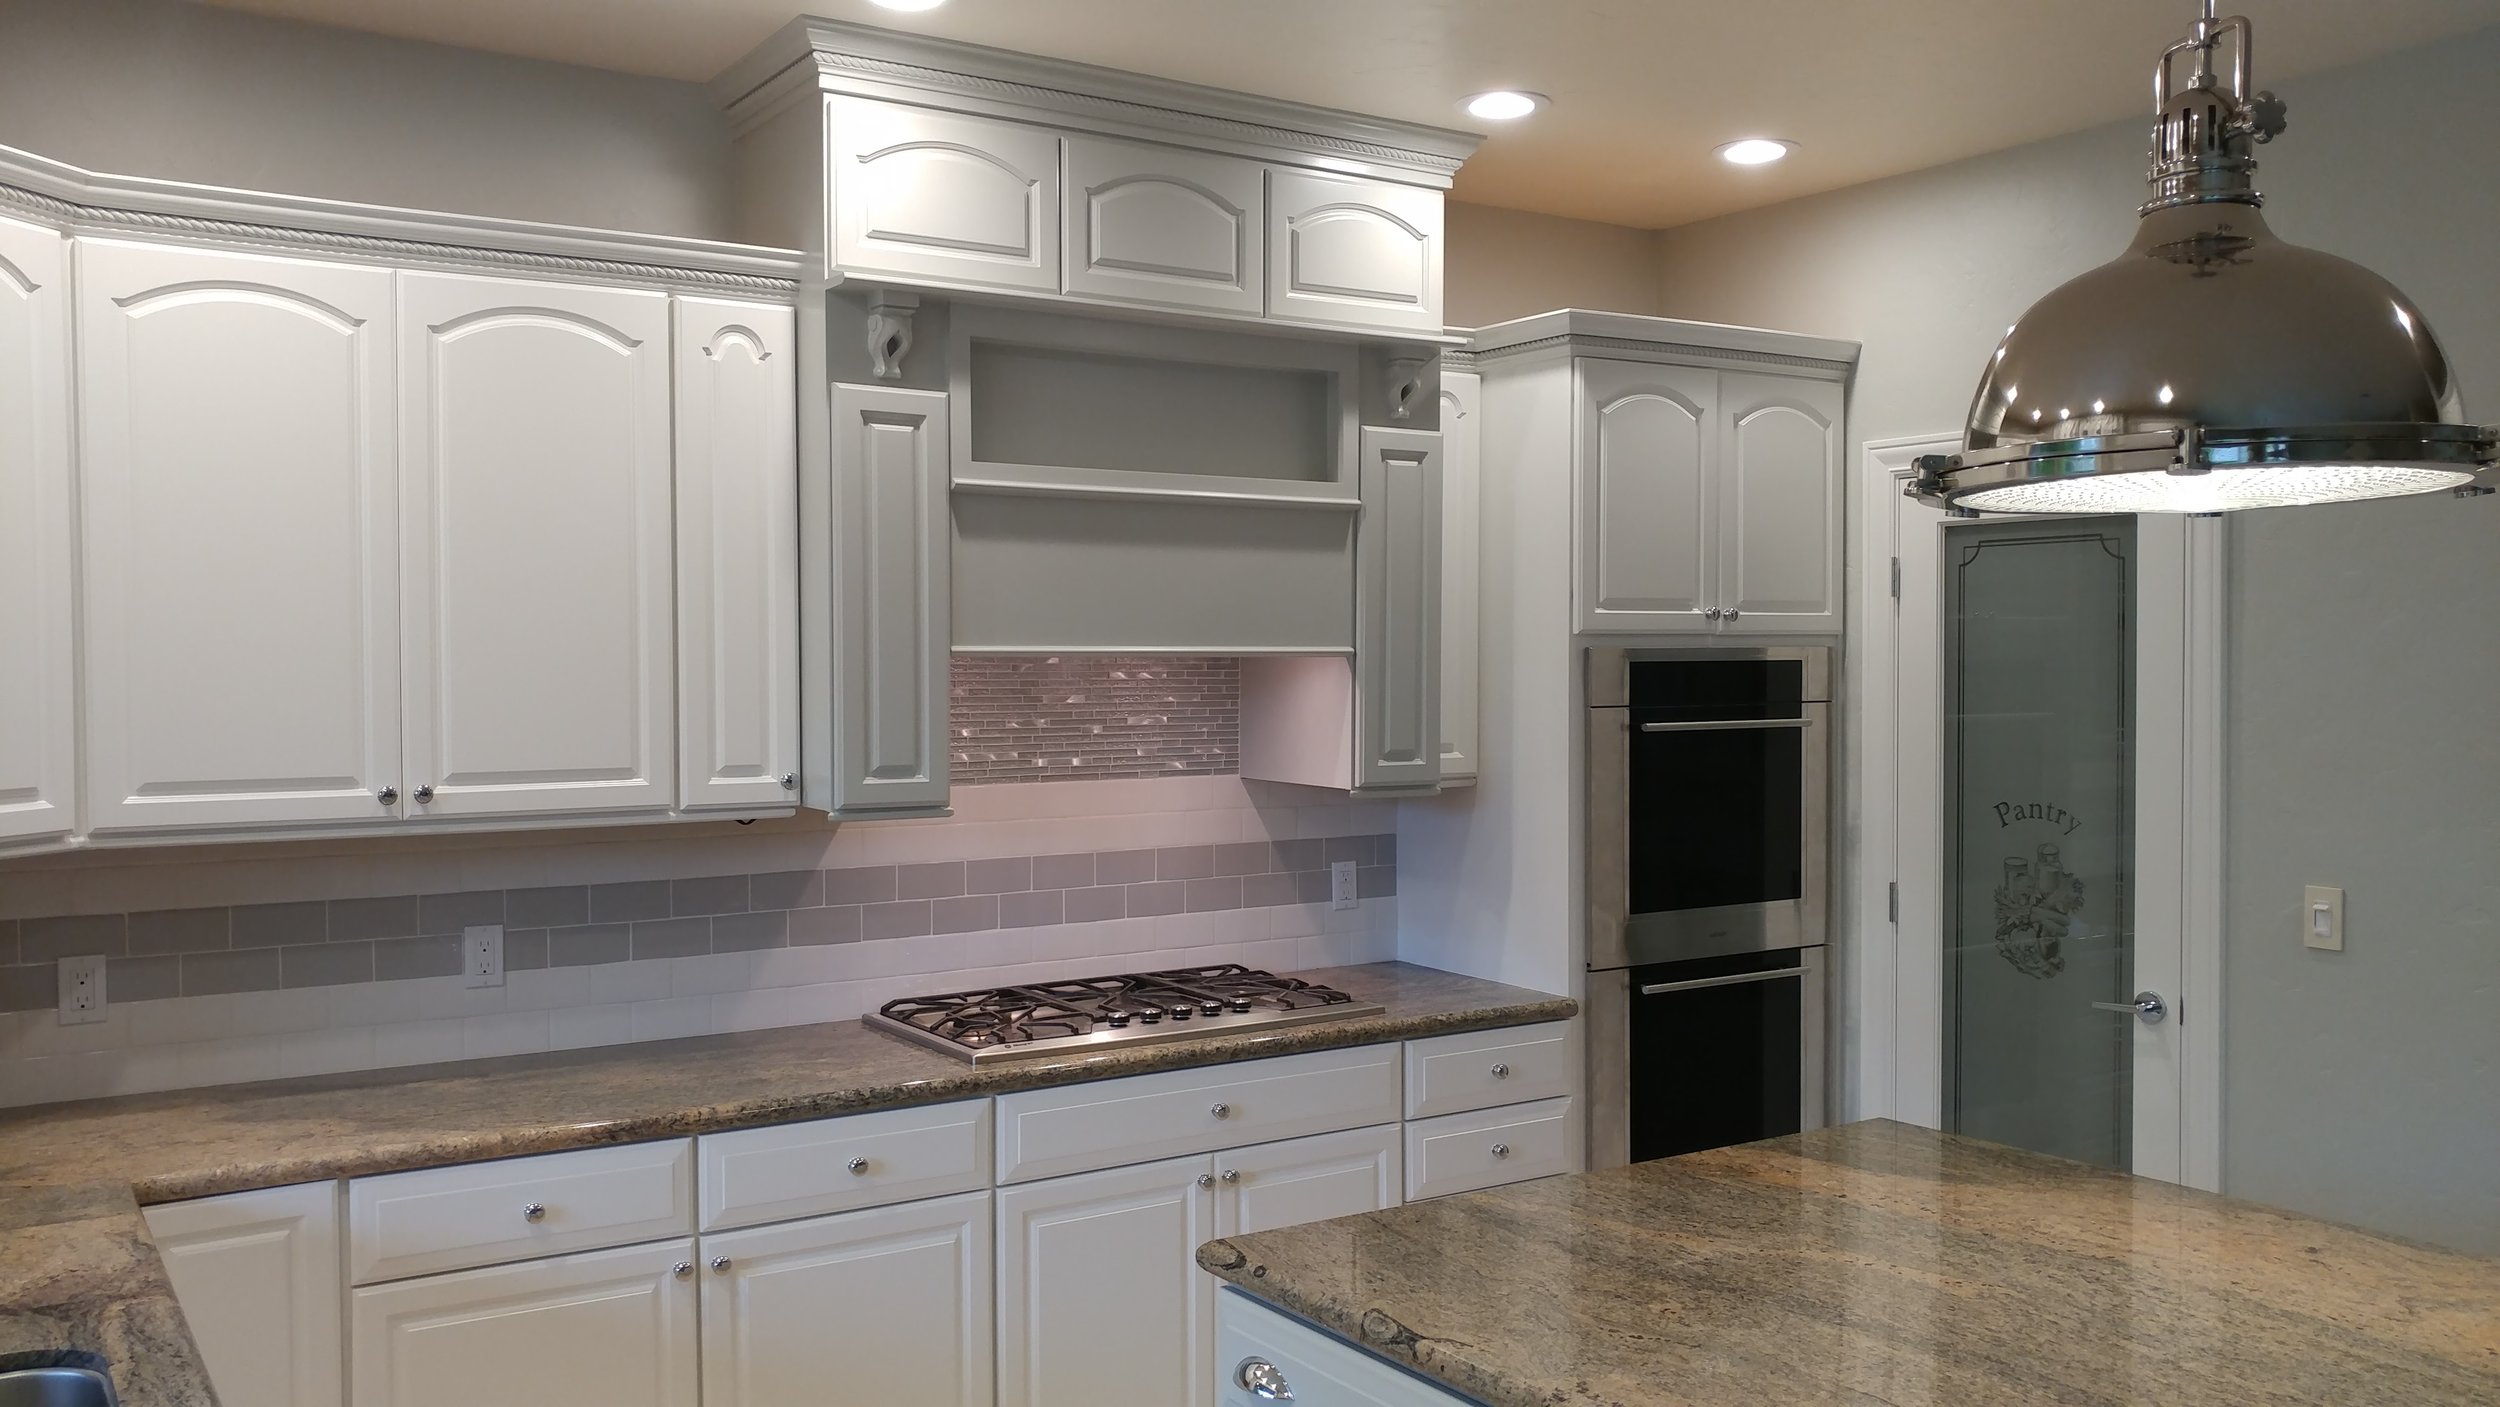 Cabinet Painting And Refinishing Flying Colors Painting Co